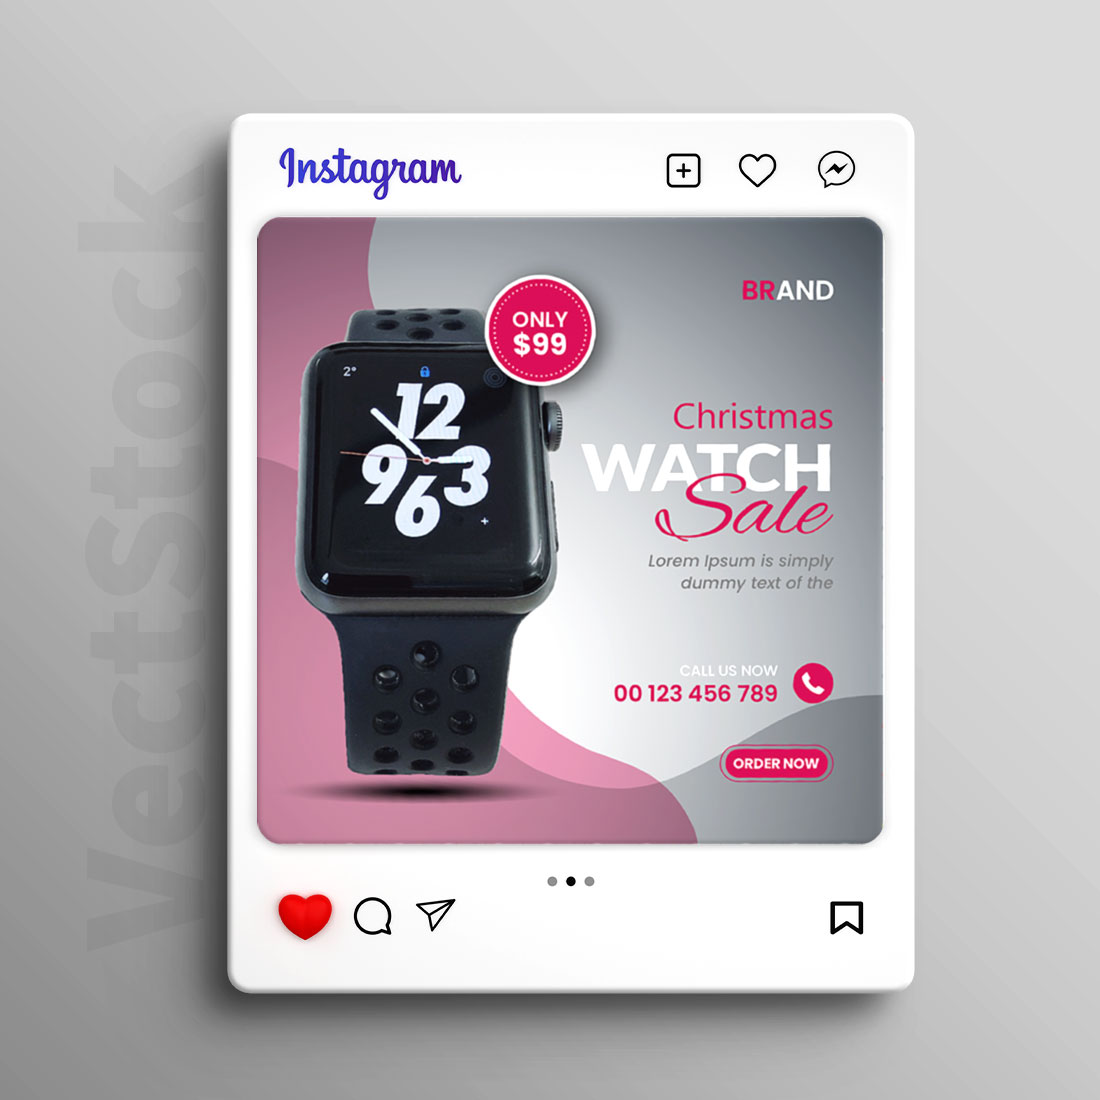 Smart watch brand product social media post banner preview image.